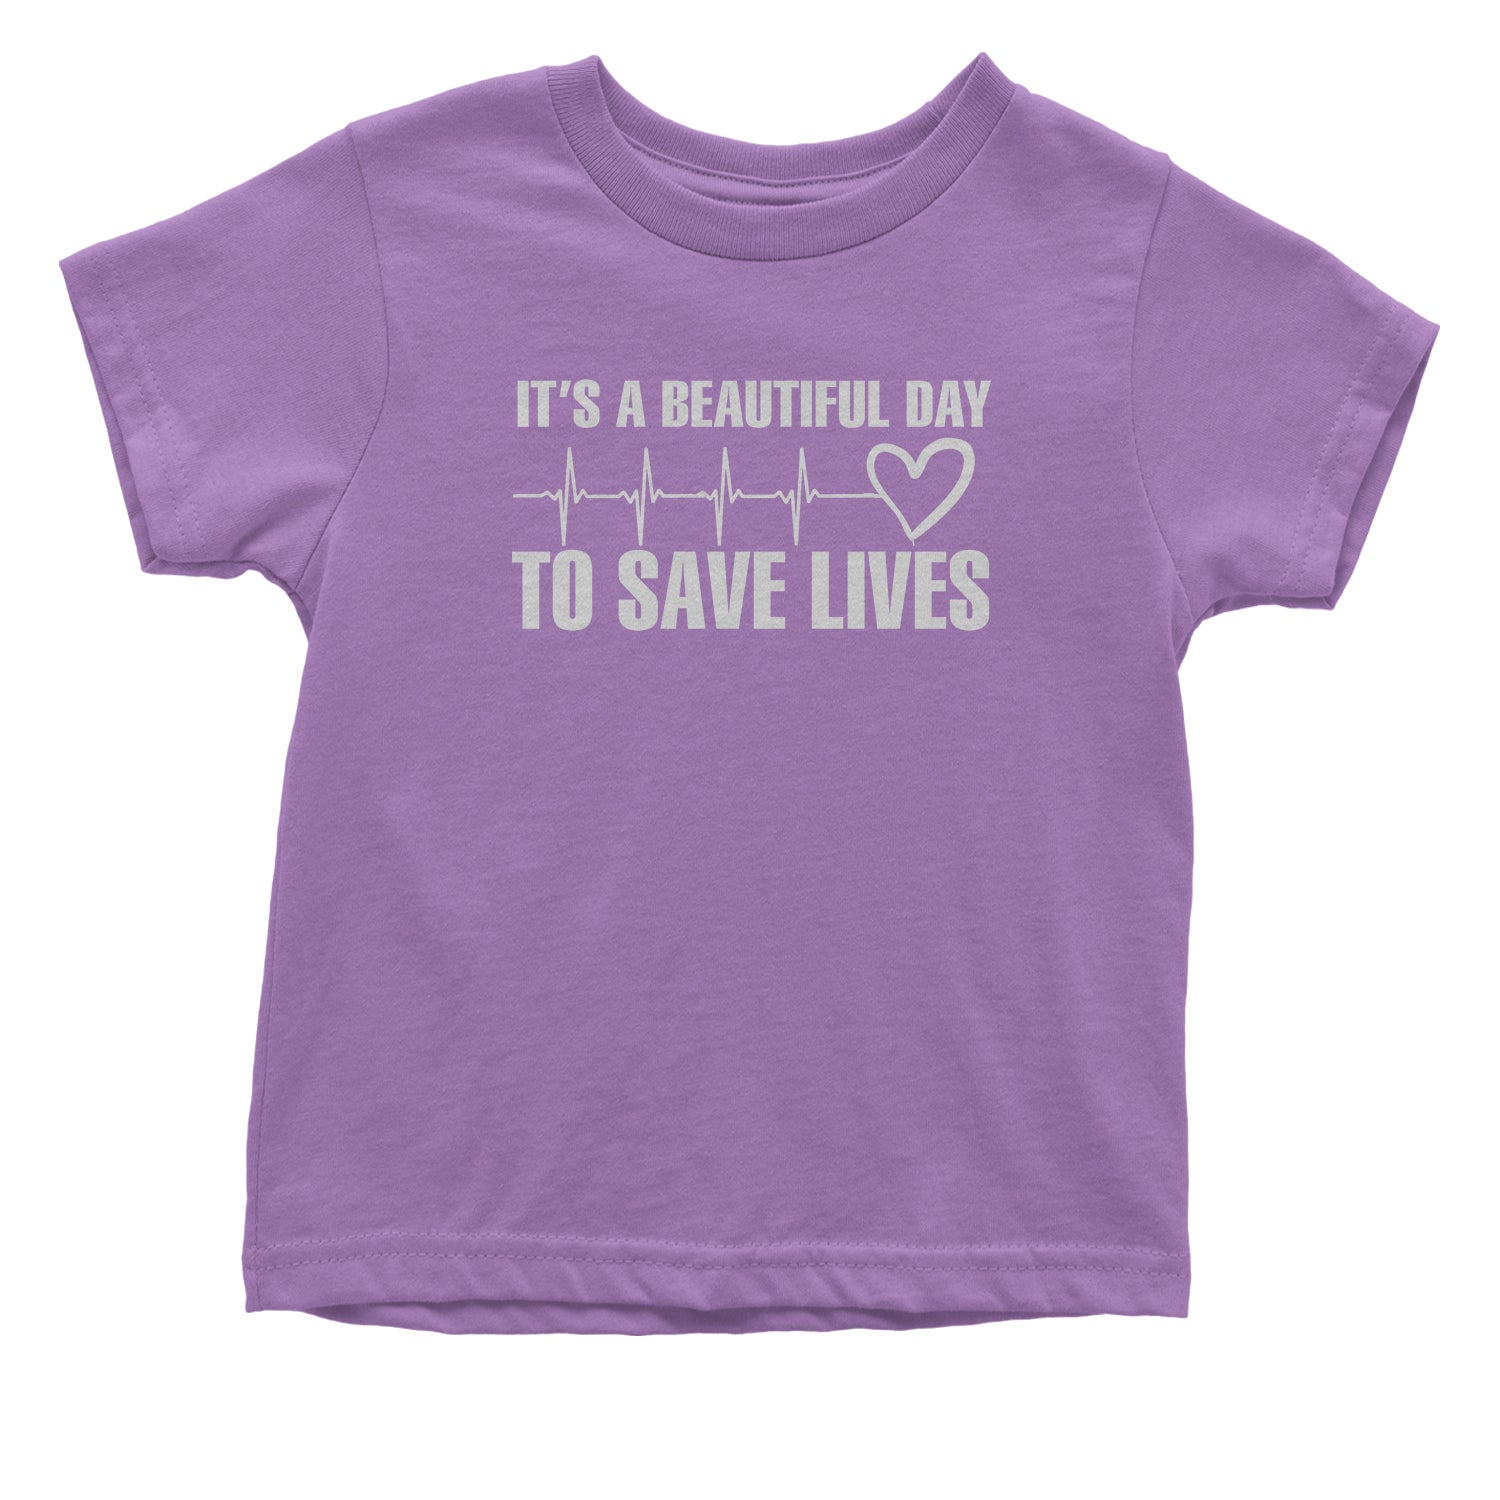 It's A Beautiful Day To Save Lives (White Print) Infant One-Piece Romper Bodysuit and Toddler T-shirt #expressiontees by Expression Tees